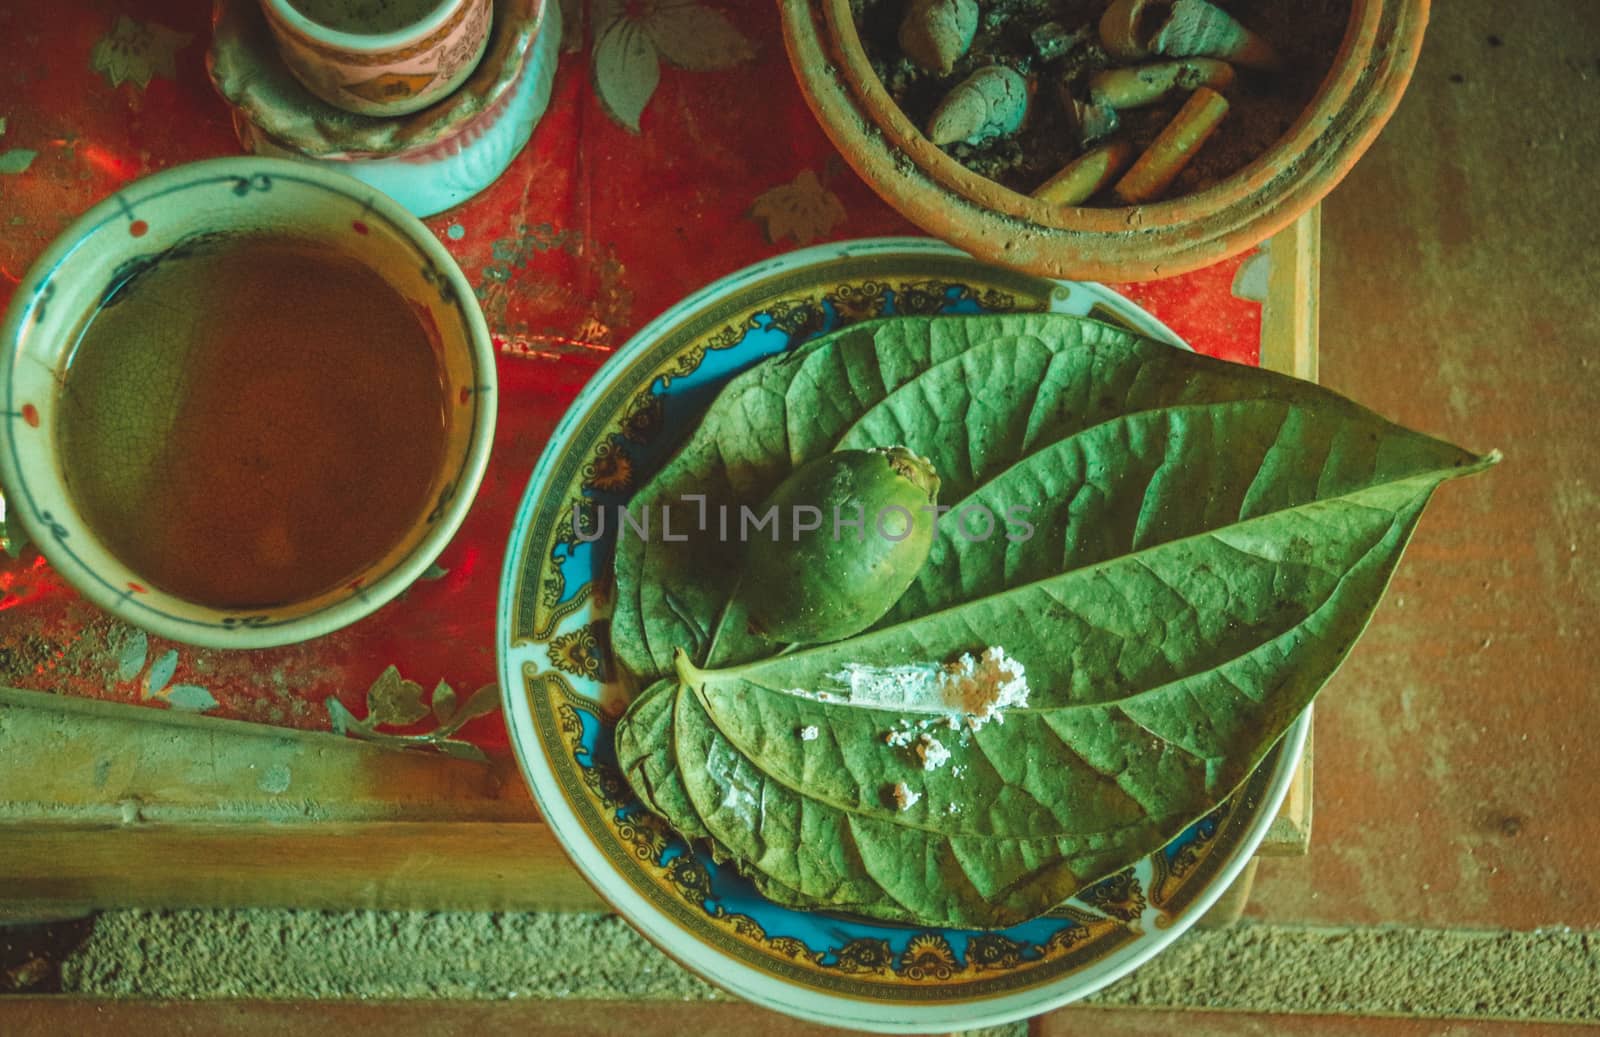 Betel nut and leaf traditionally used as stimulant and health booster by chewing it raw in most part of Southeast Asian countries